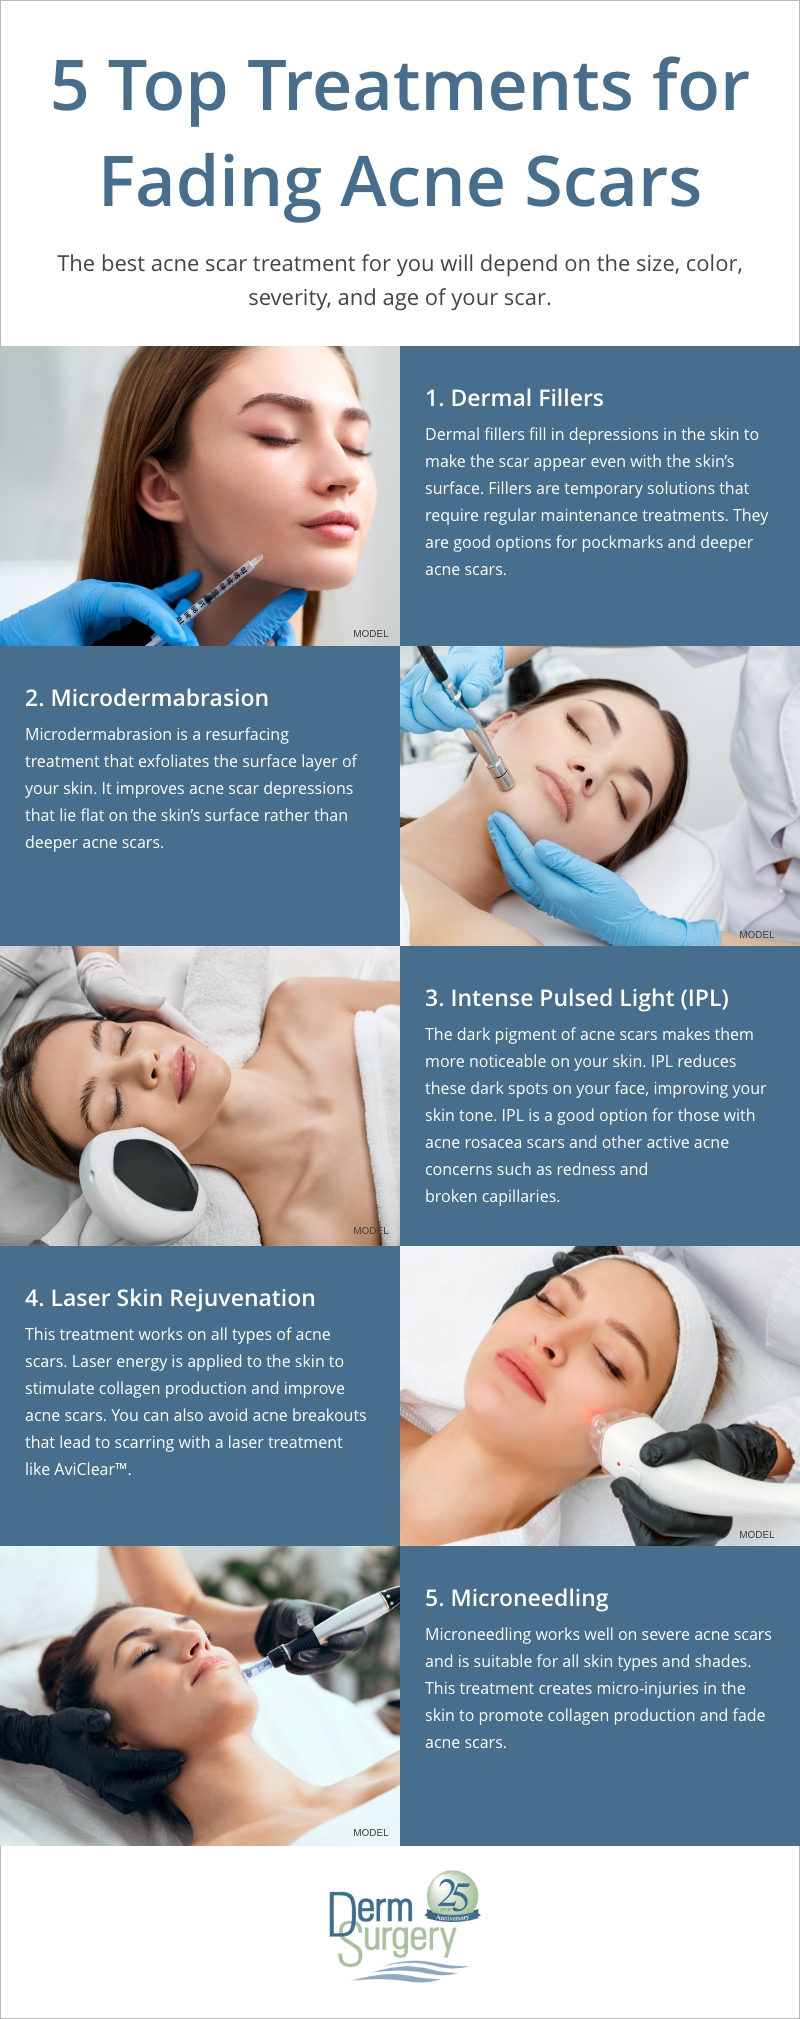 Instagraphic: "5 Top Treatments for Fading Acne Scars"